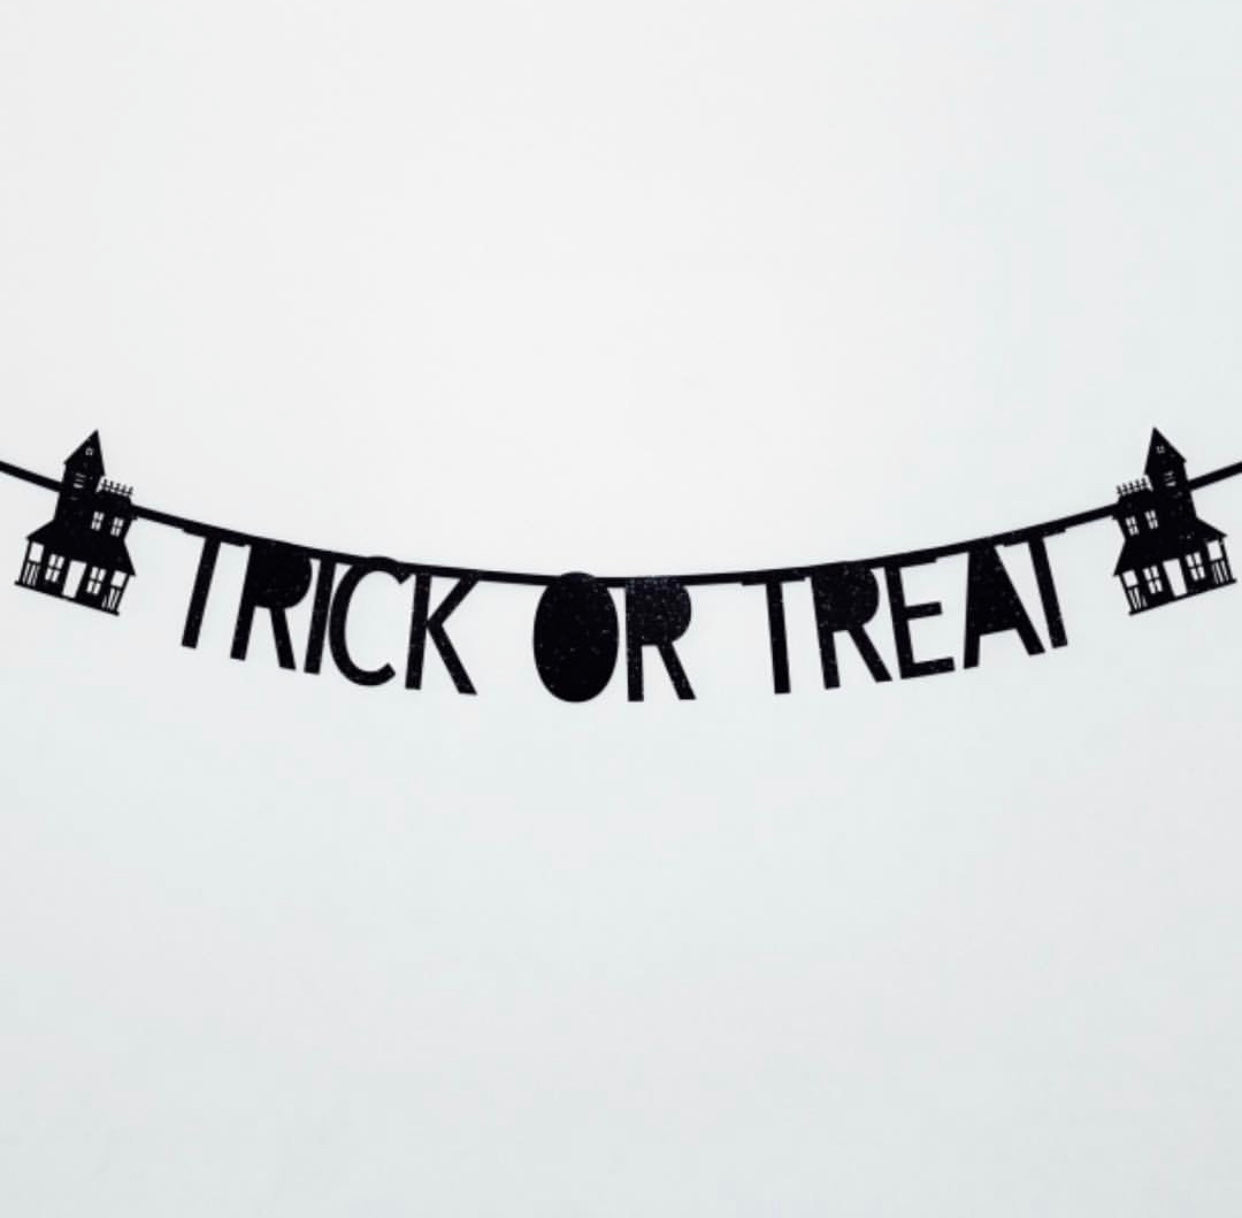 'TRICK OR TREAT' BANNER